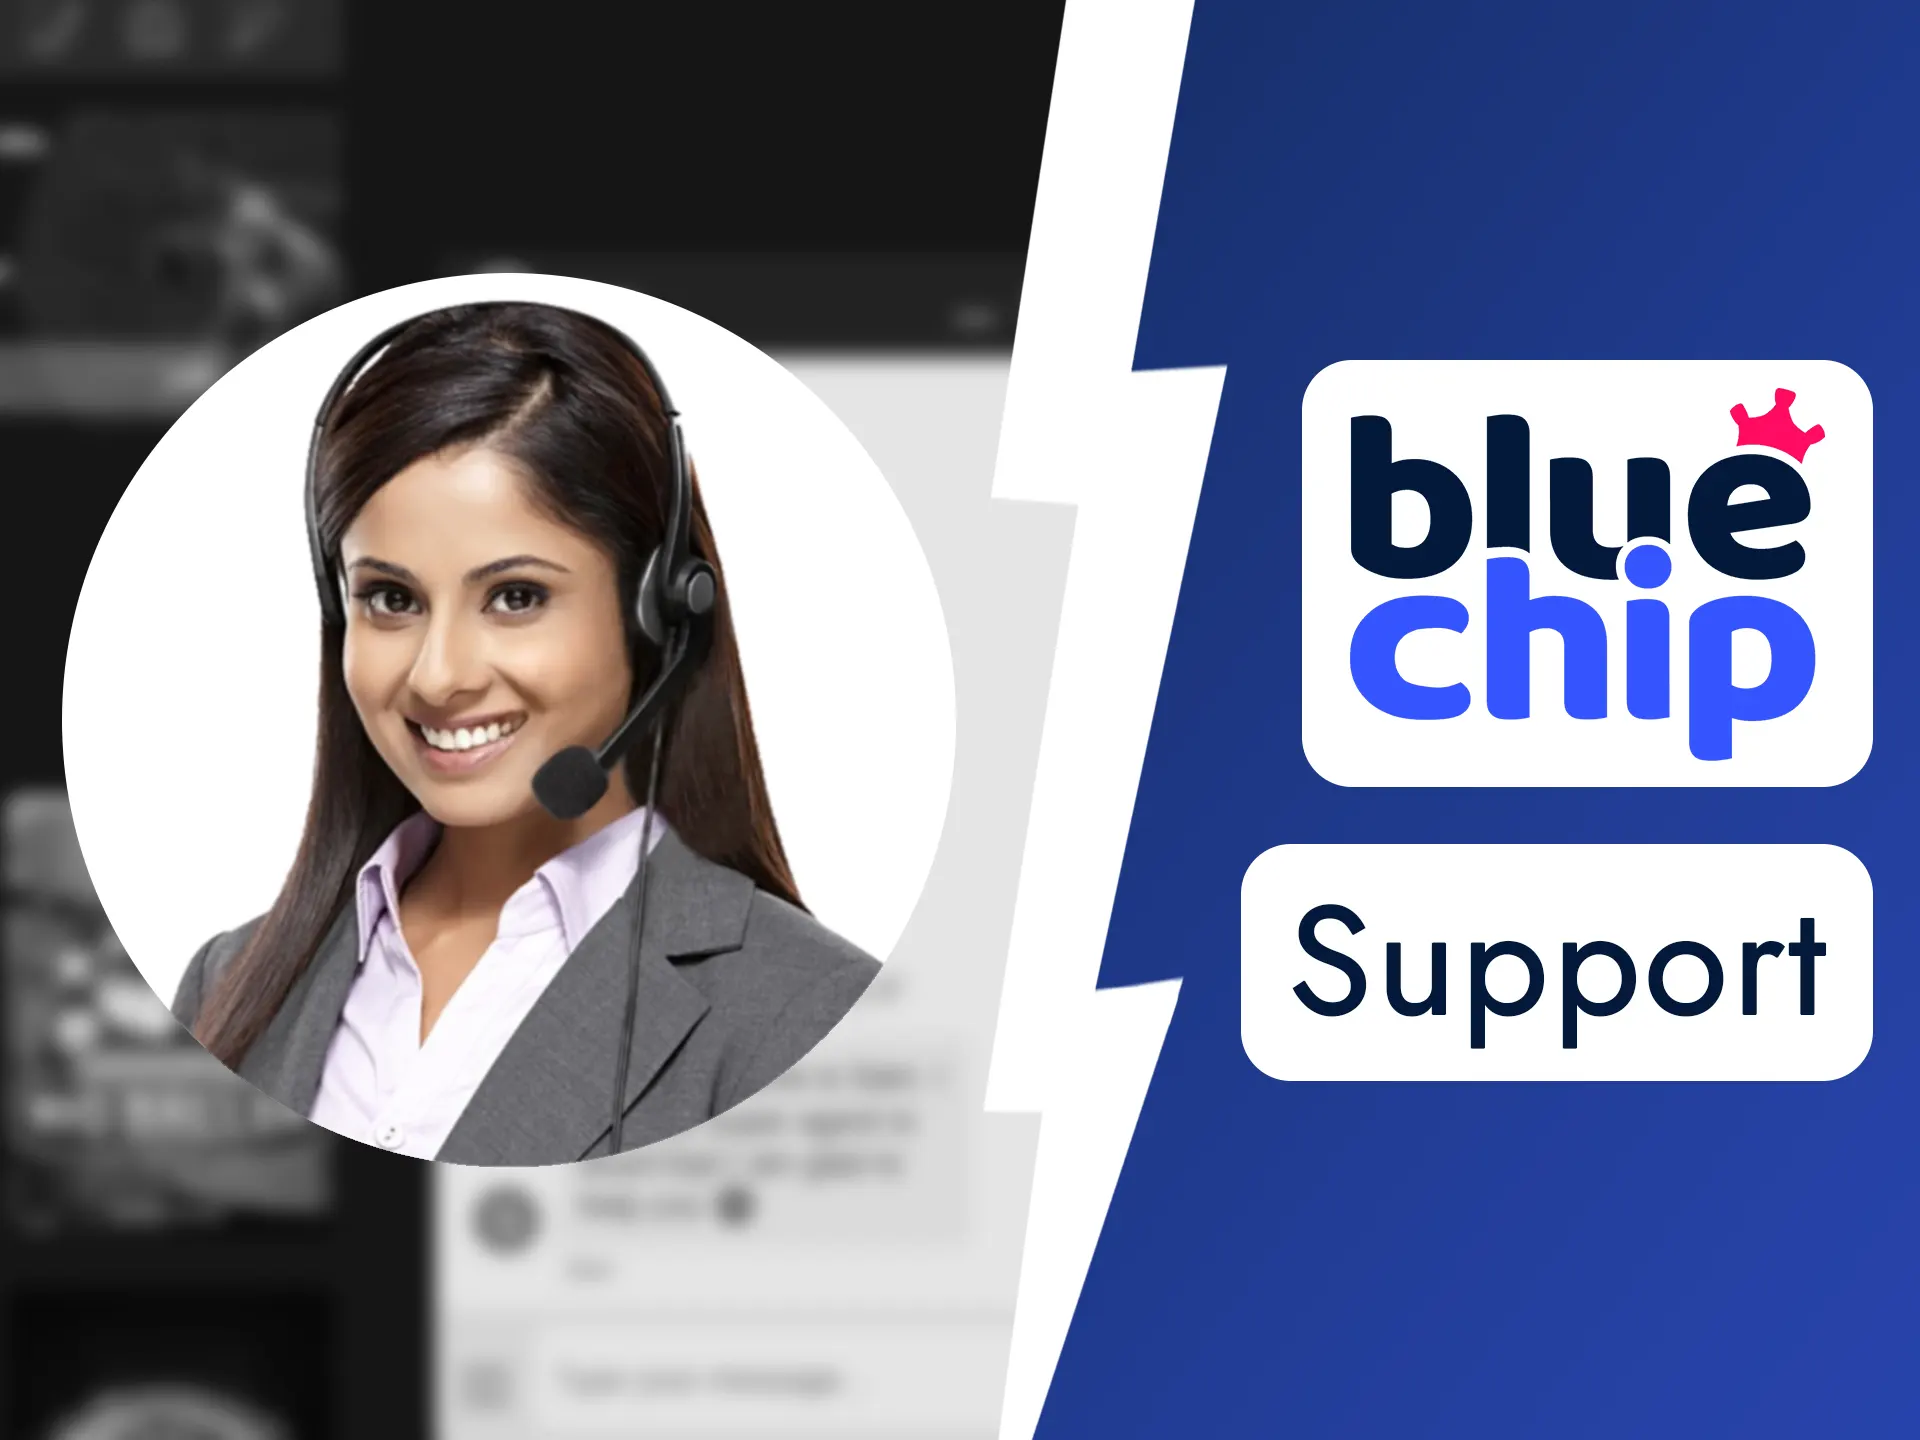 Ask all of your questions to Bluechip support.